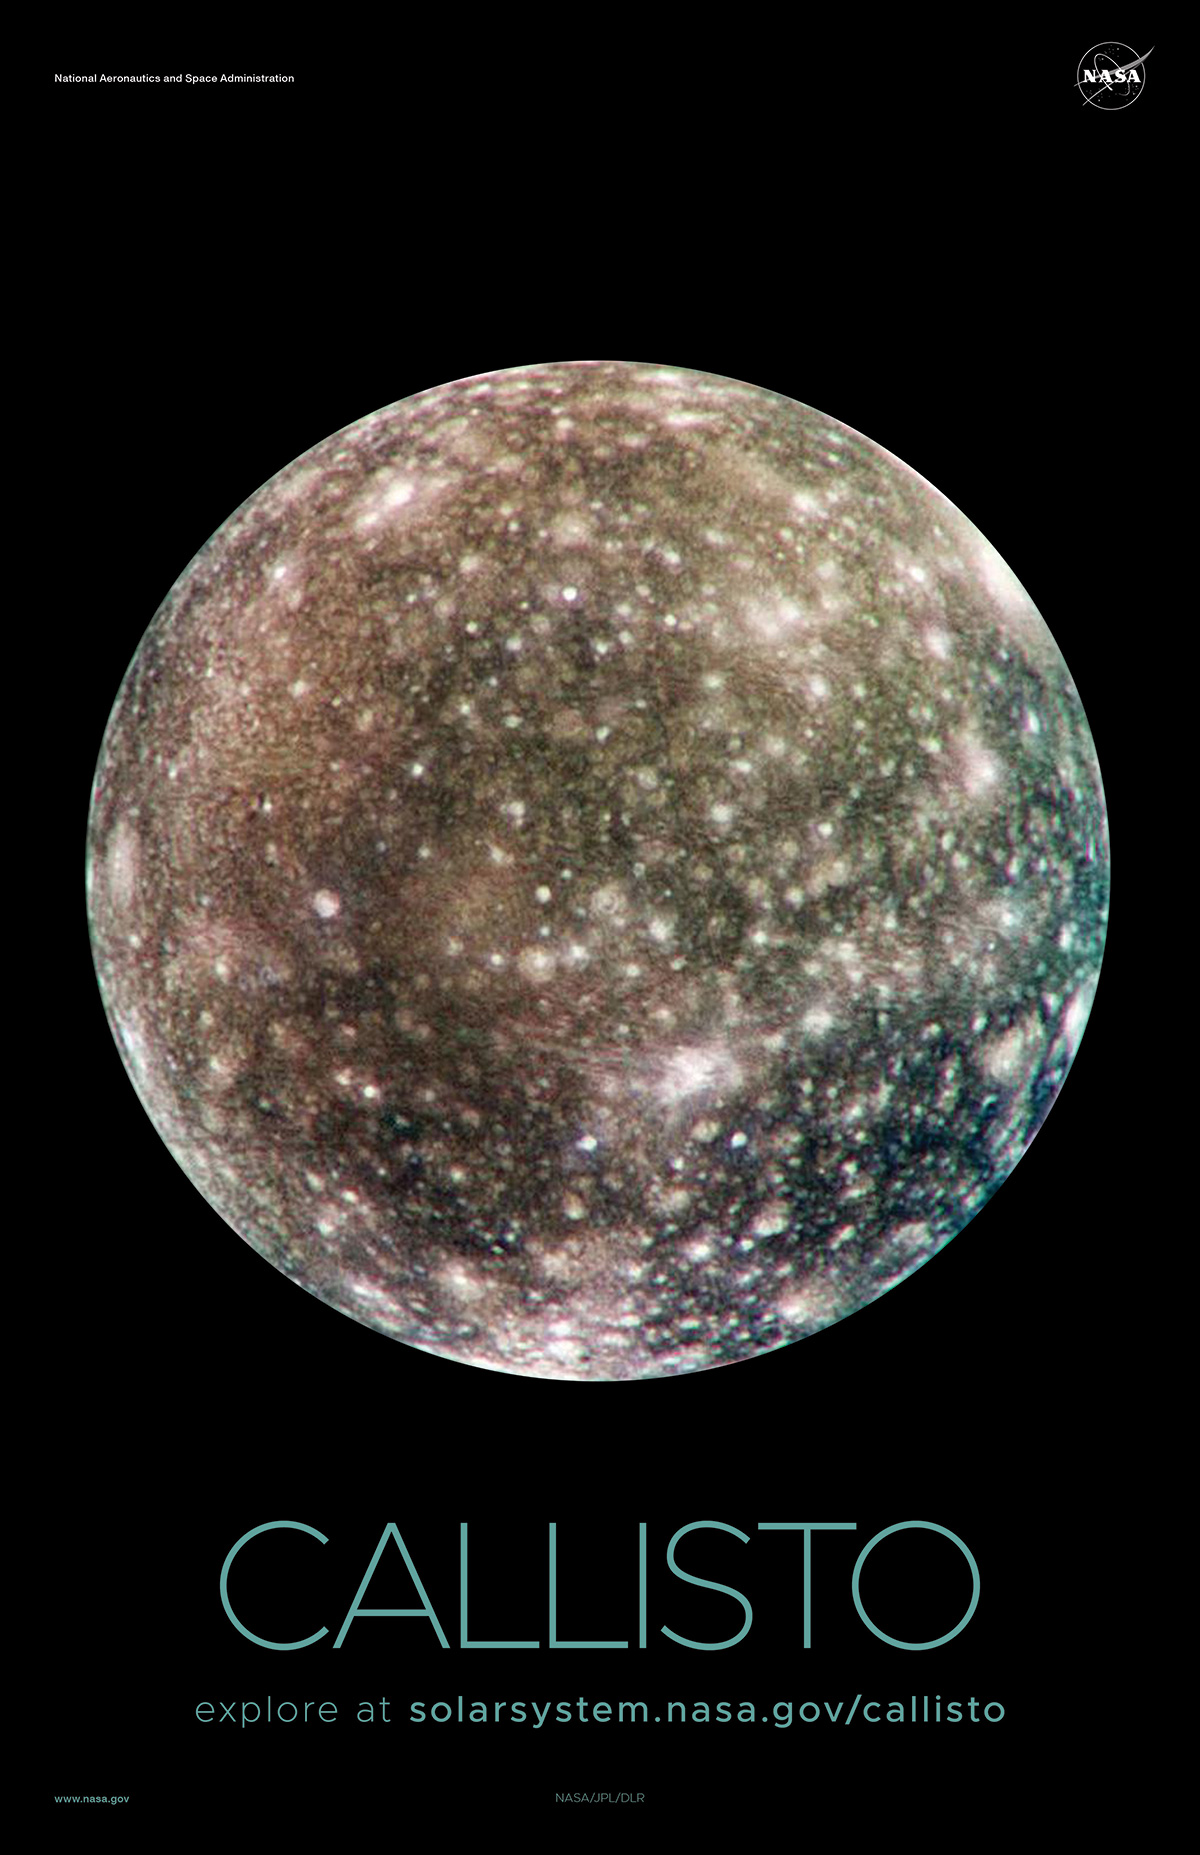 Full disk image of cratered Callisto.